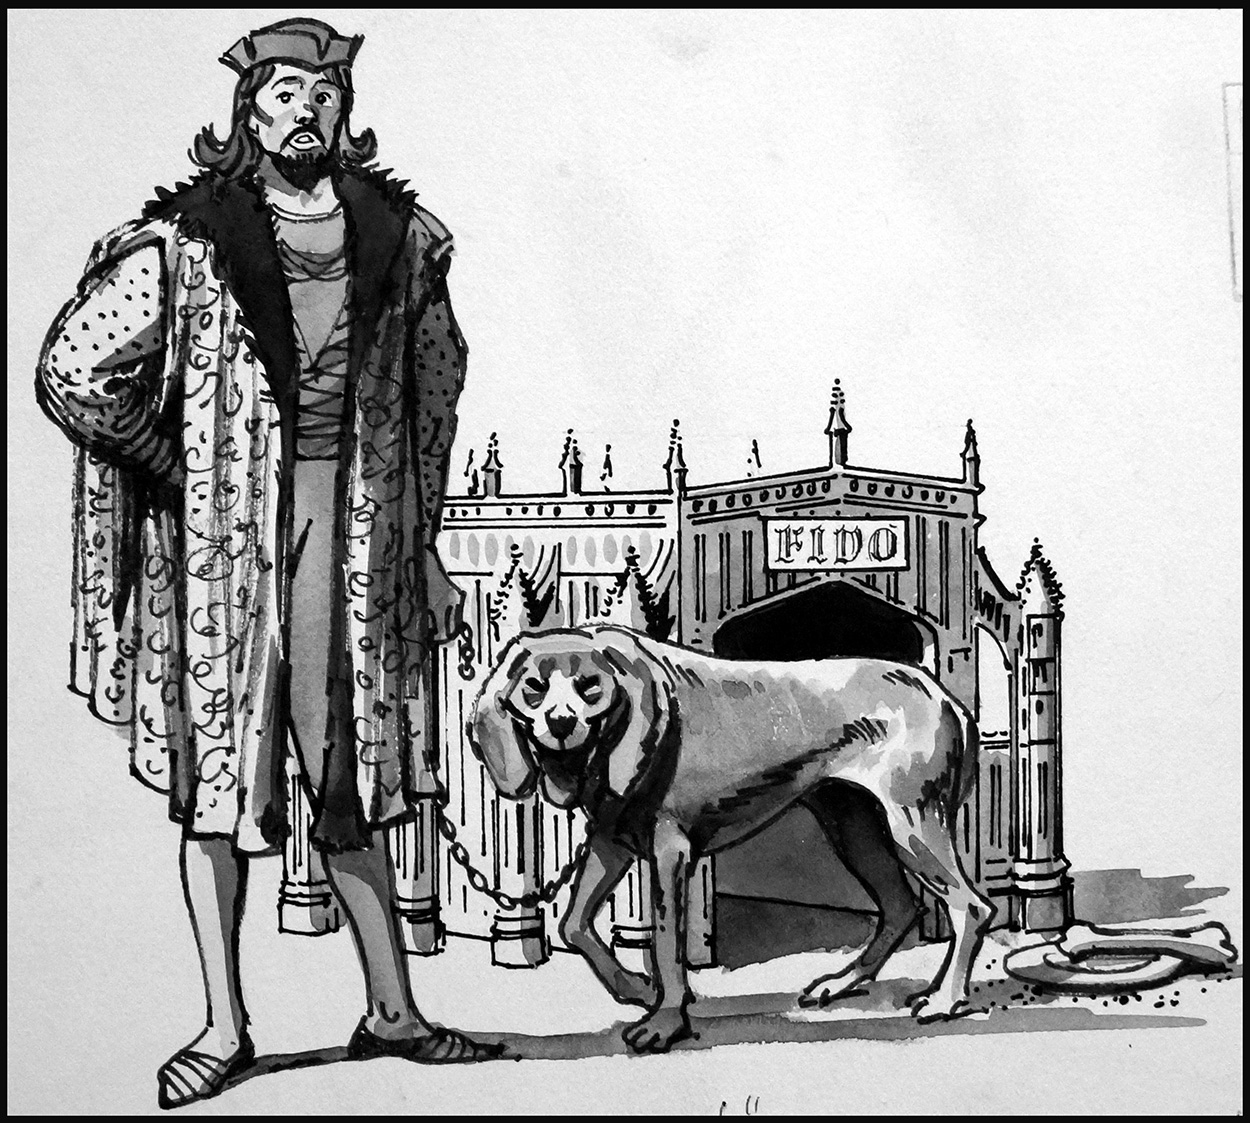 Fido's Gothic Mansion (Original) art by Architecture (Ralph Bruce) at The Illustration Art Gallery